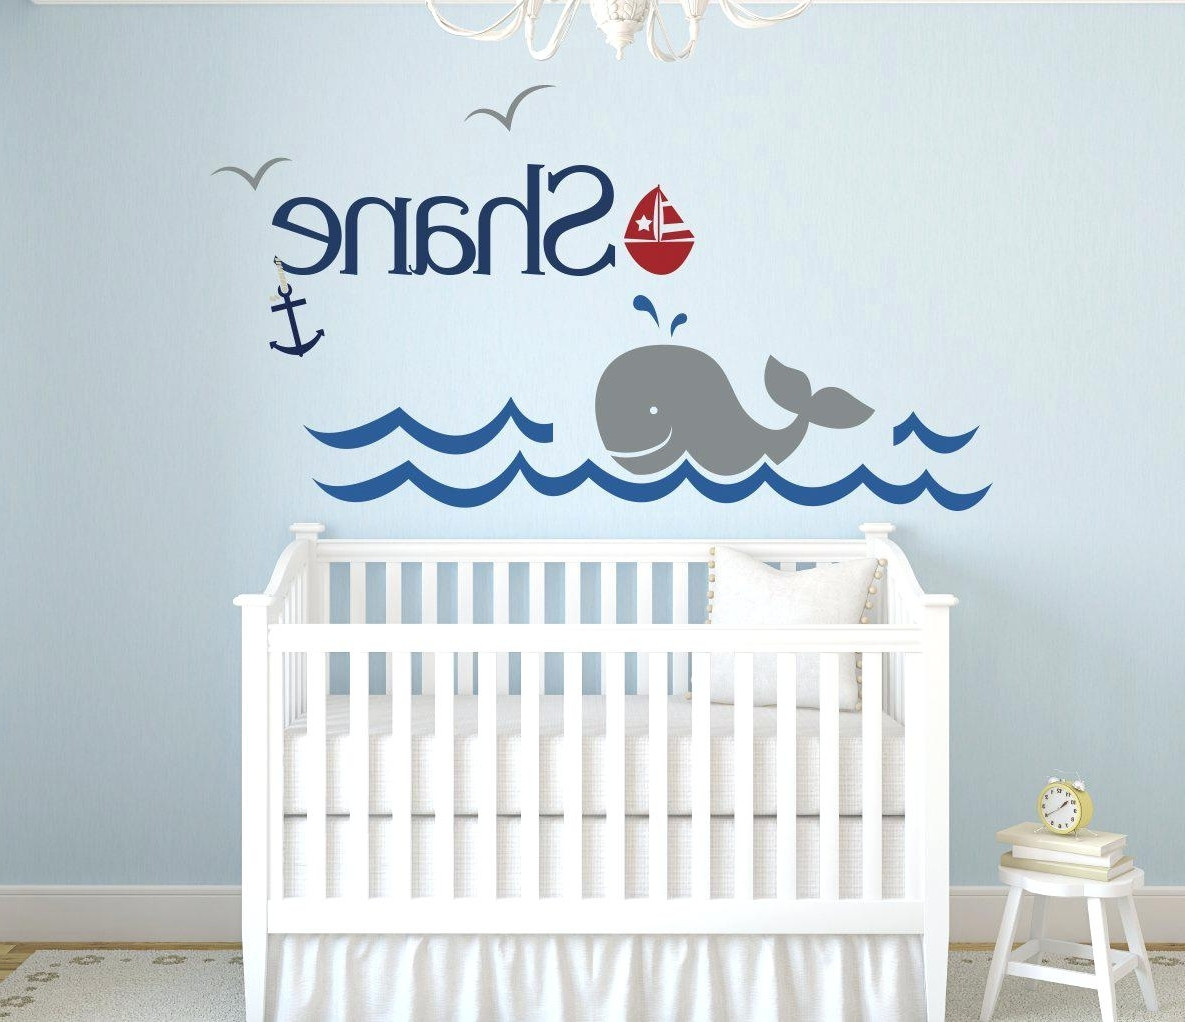 Baby Name Wall Decor
 15 Best Collection of Baby Name Wall Art